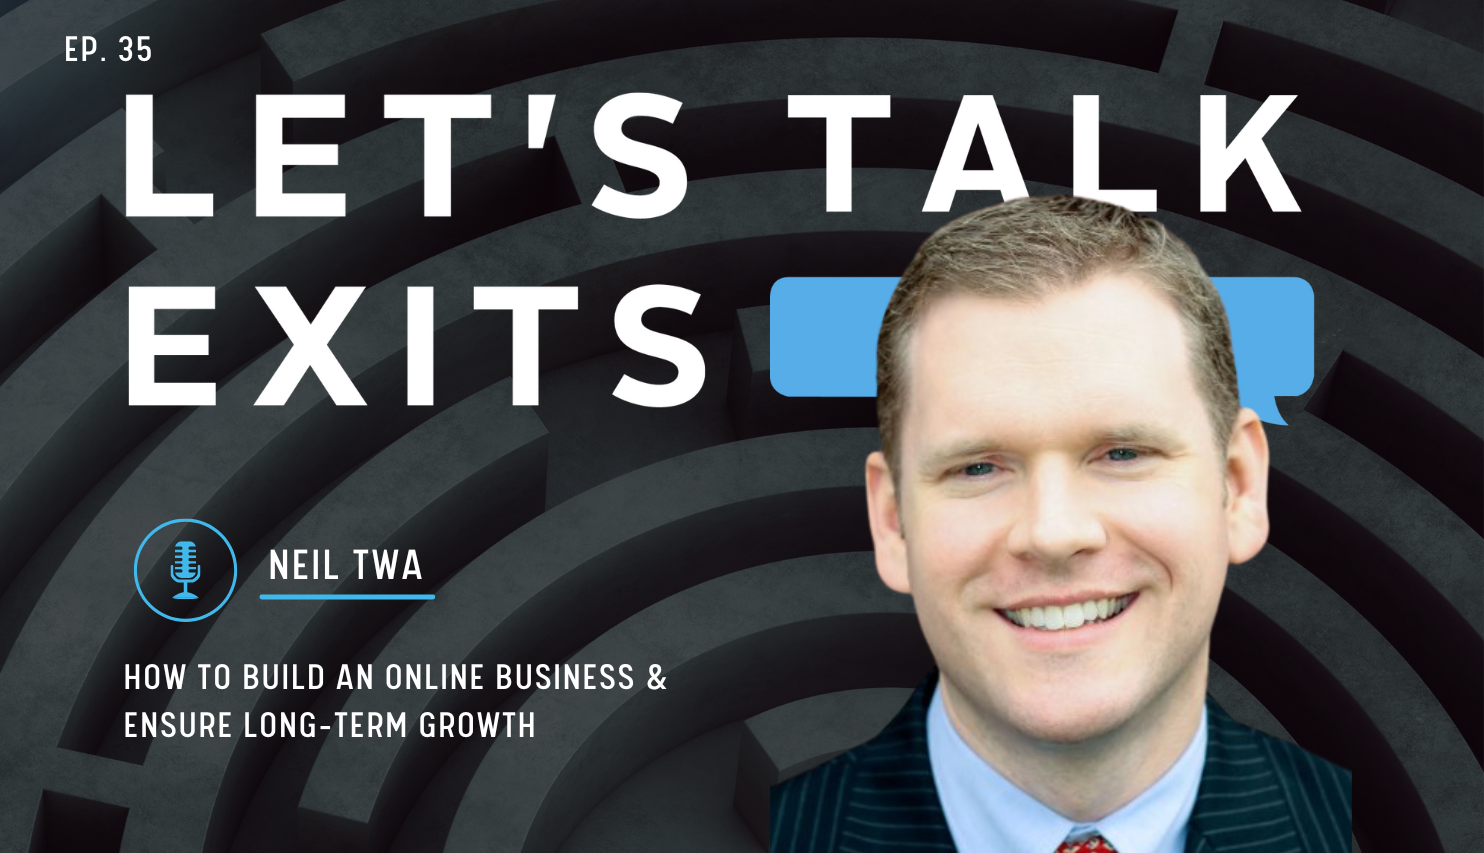 How to Build An Online Business & Ensure Long-Term Growth with Neil Twa